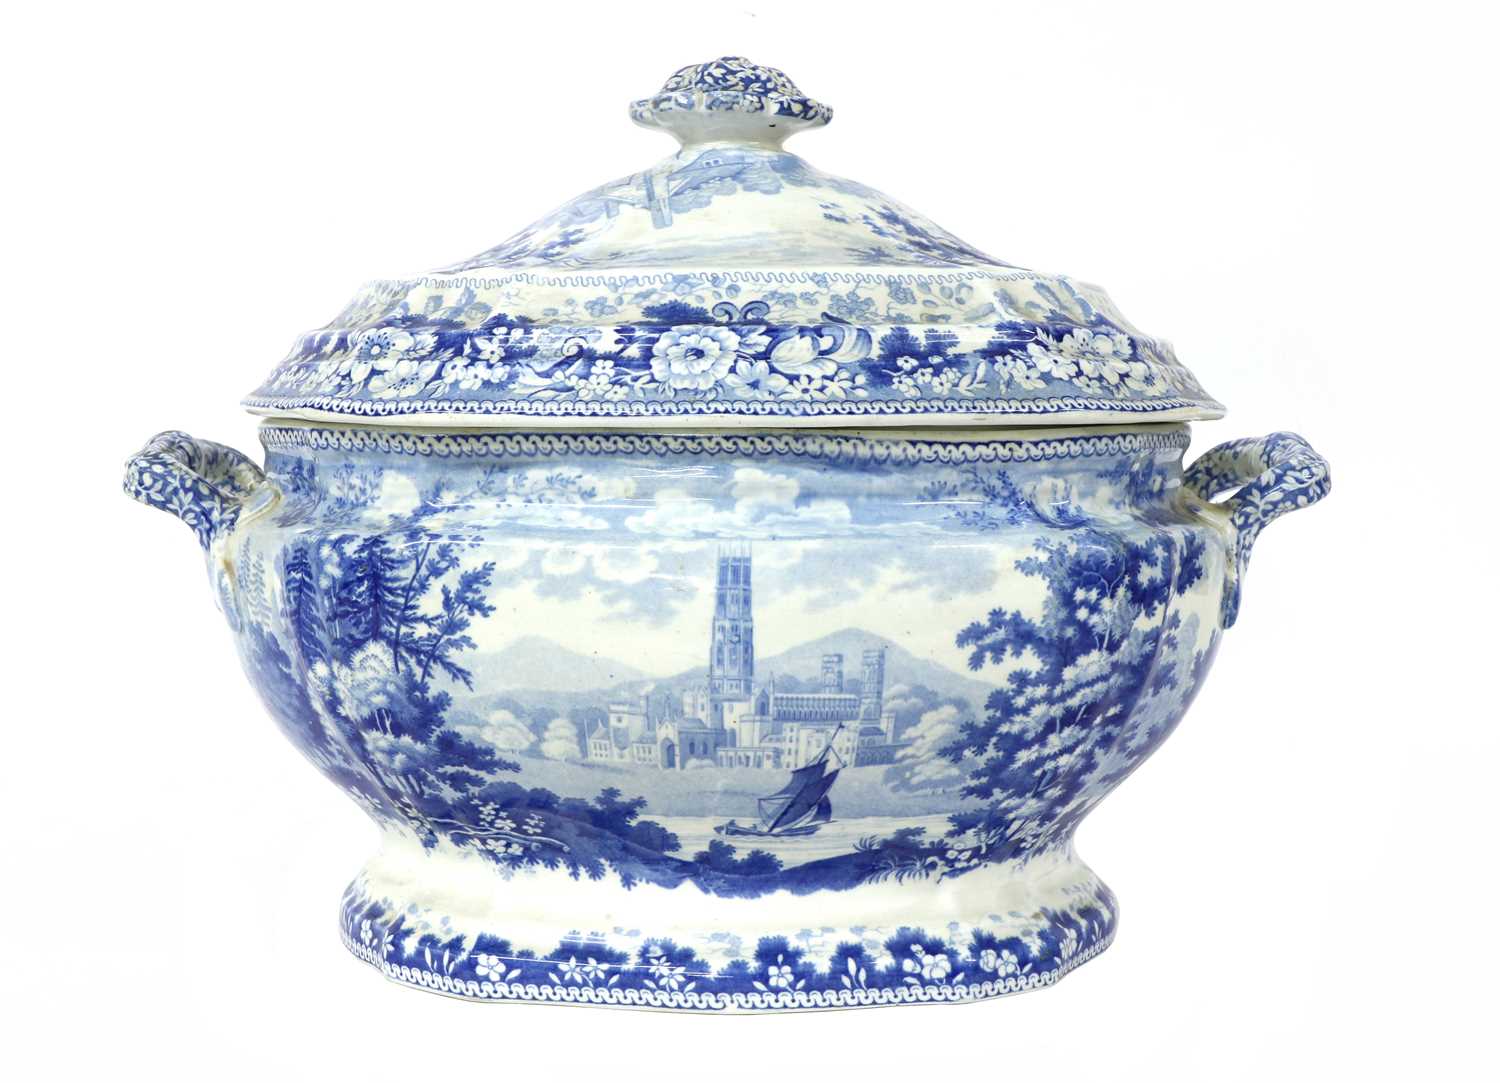 Lot 96 - A blue and white potter semi-china tureen and cover